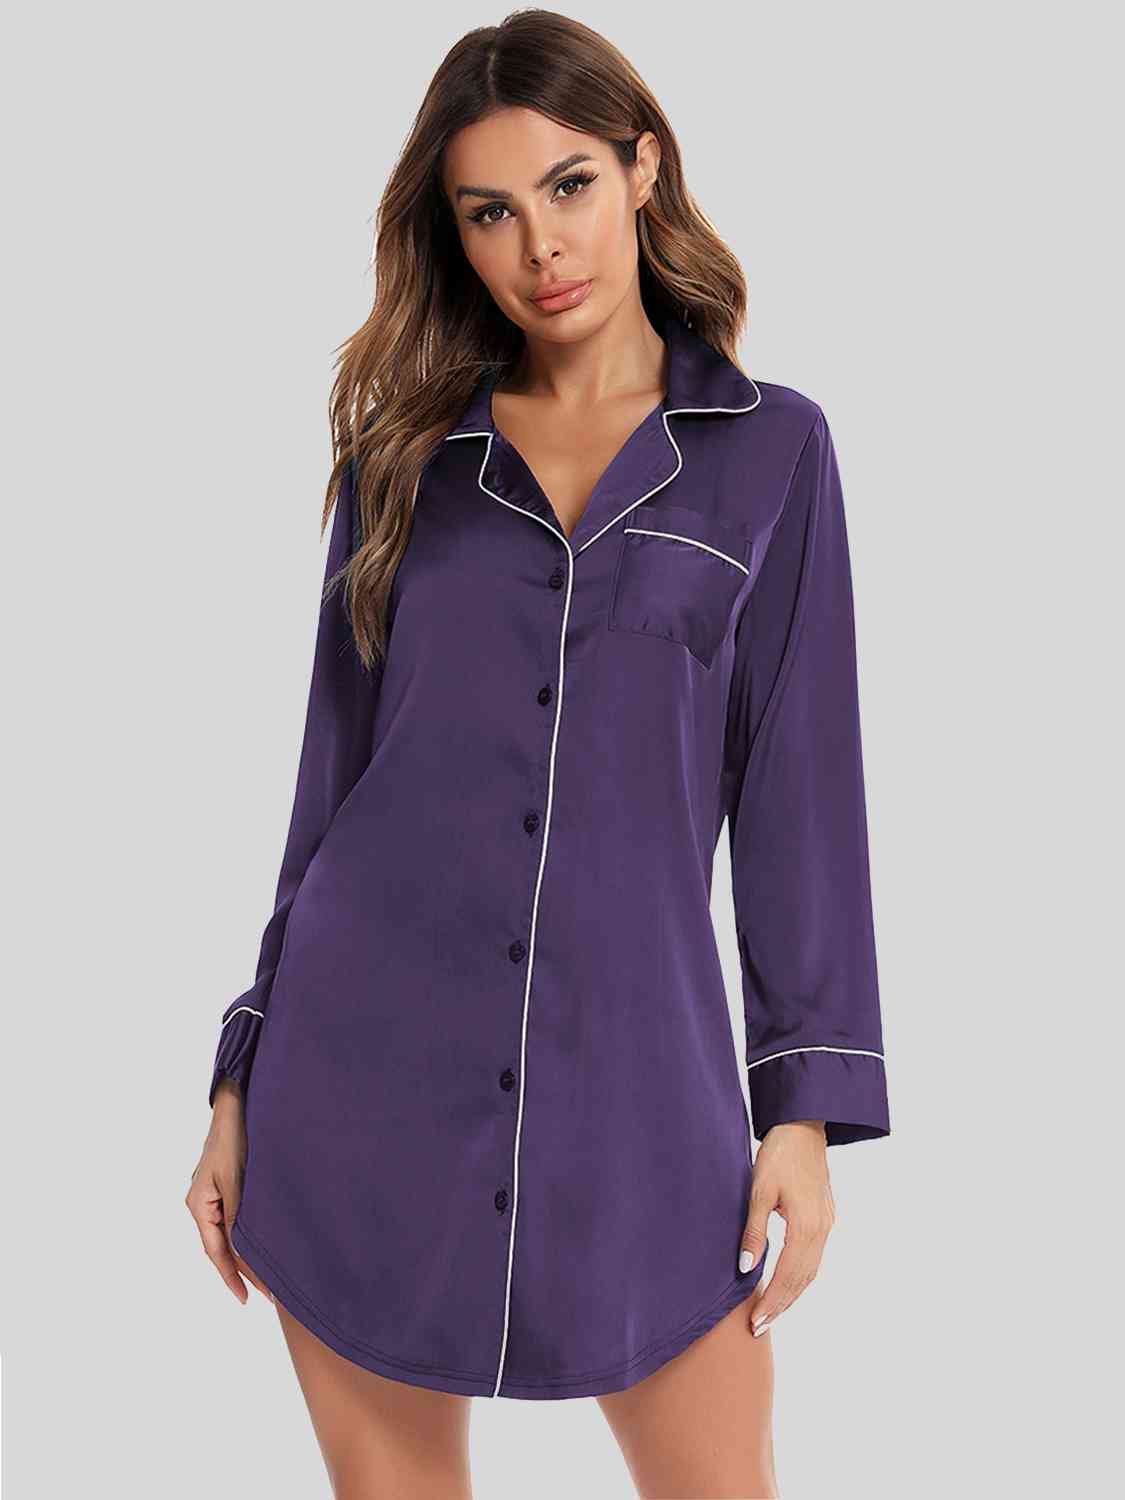 Button Up Lapel Collar Night Dress with Pocket Violet